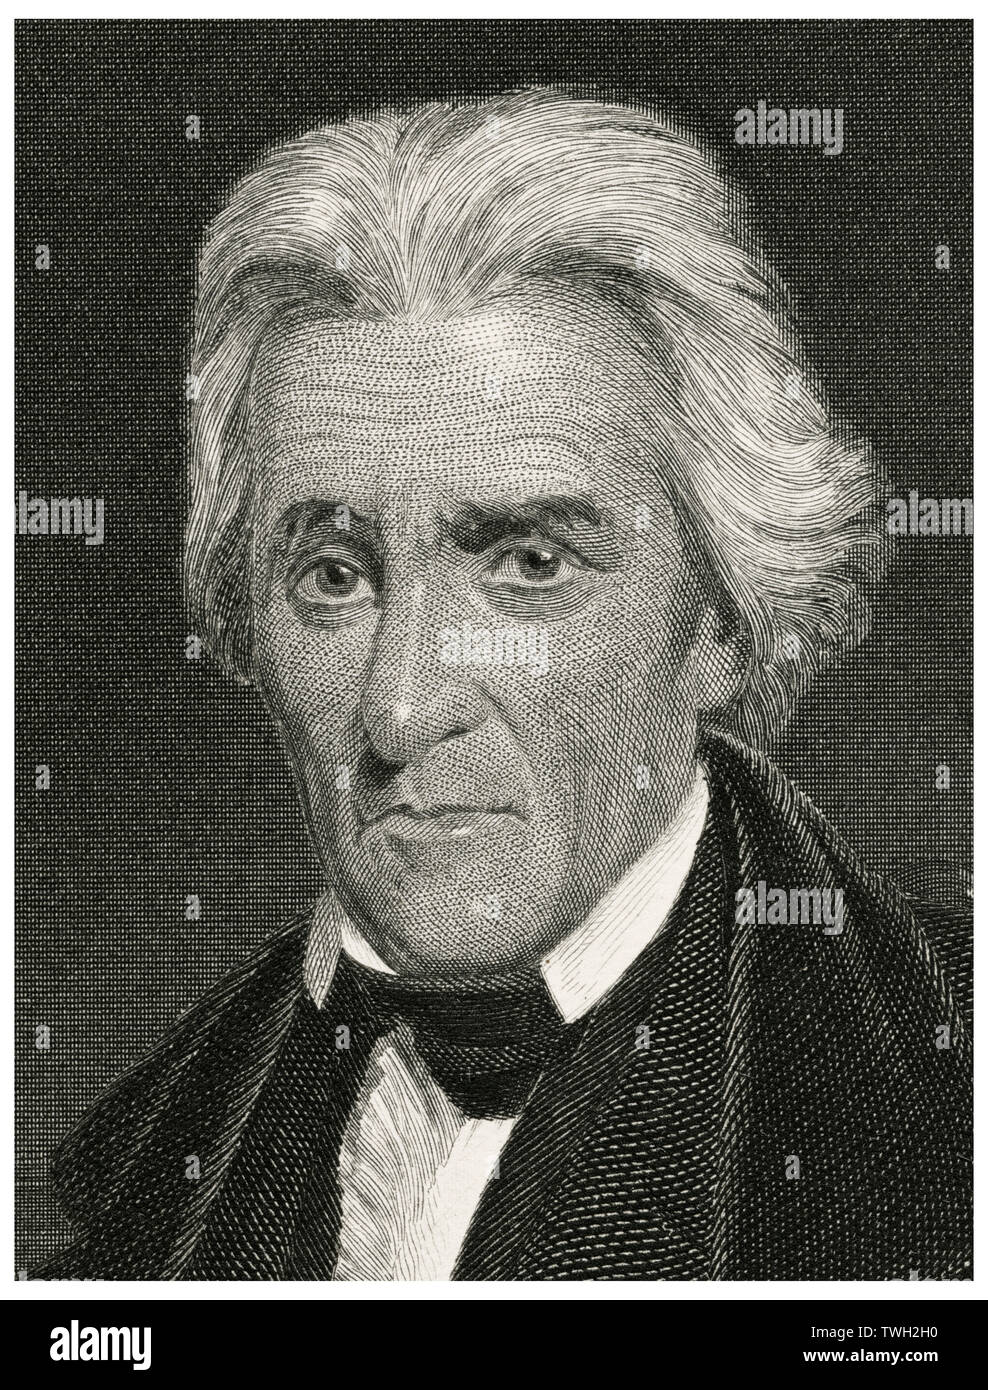 Andrew Jackson (1767-1845), Seventh President of the United States, Head and Shoulders Portrait, Steel Engraving, Portrait Gallery of Eminent Men and Women of Europe and America by Evert A. Duyckinck, Published by Henry J. Johnson, Johnson, Wilson & Company, New York, 1873 Stock Photo